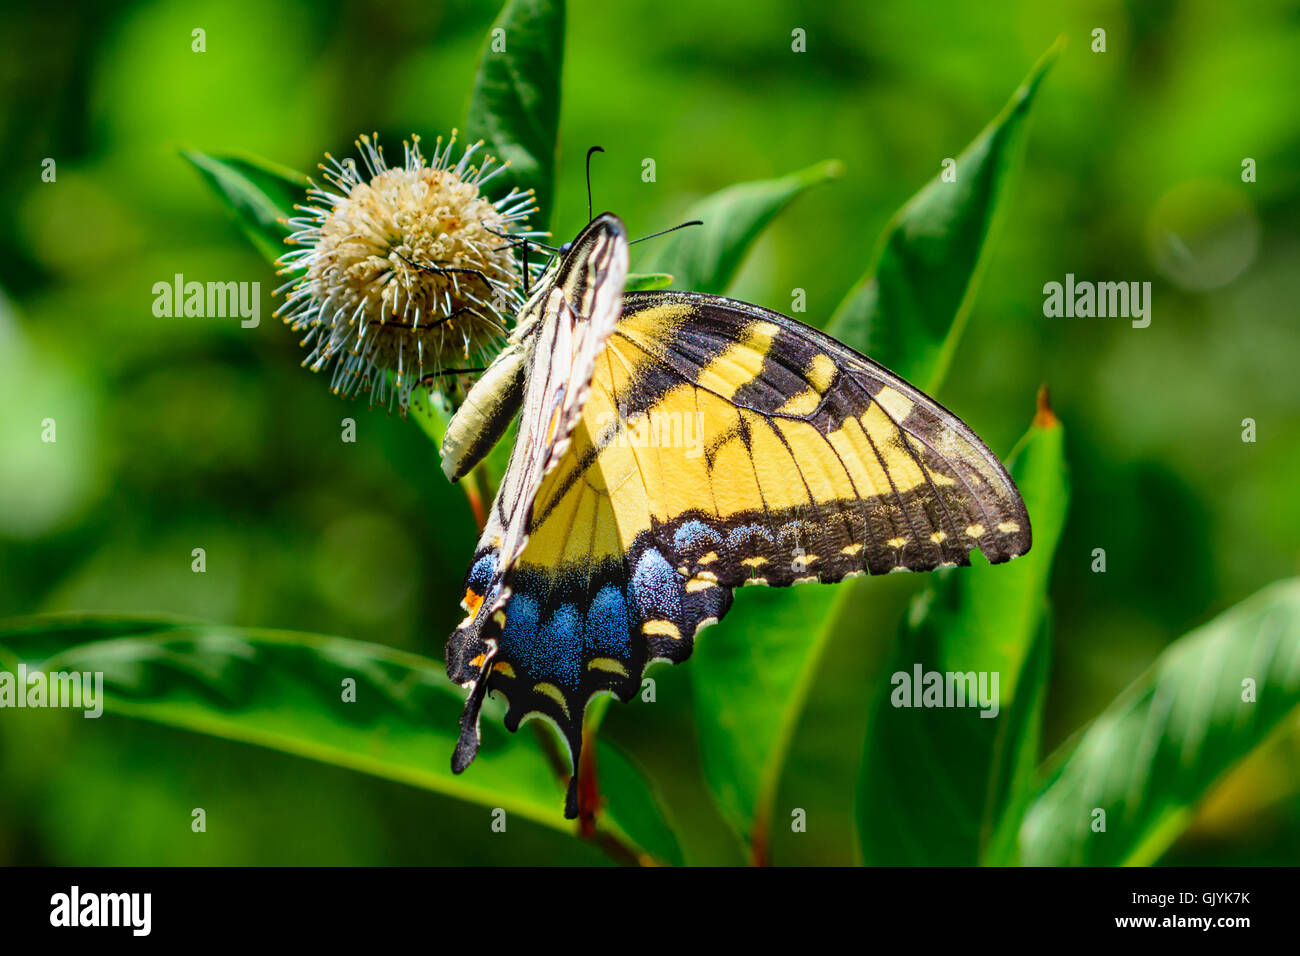 Eastern tiger swallowtail (Papilio glaucus) butterfly with vivid blue yellow and black. Side View Stock Photo